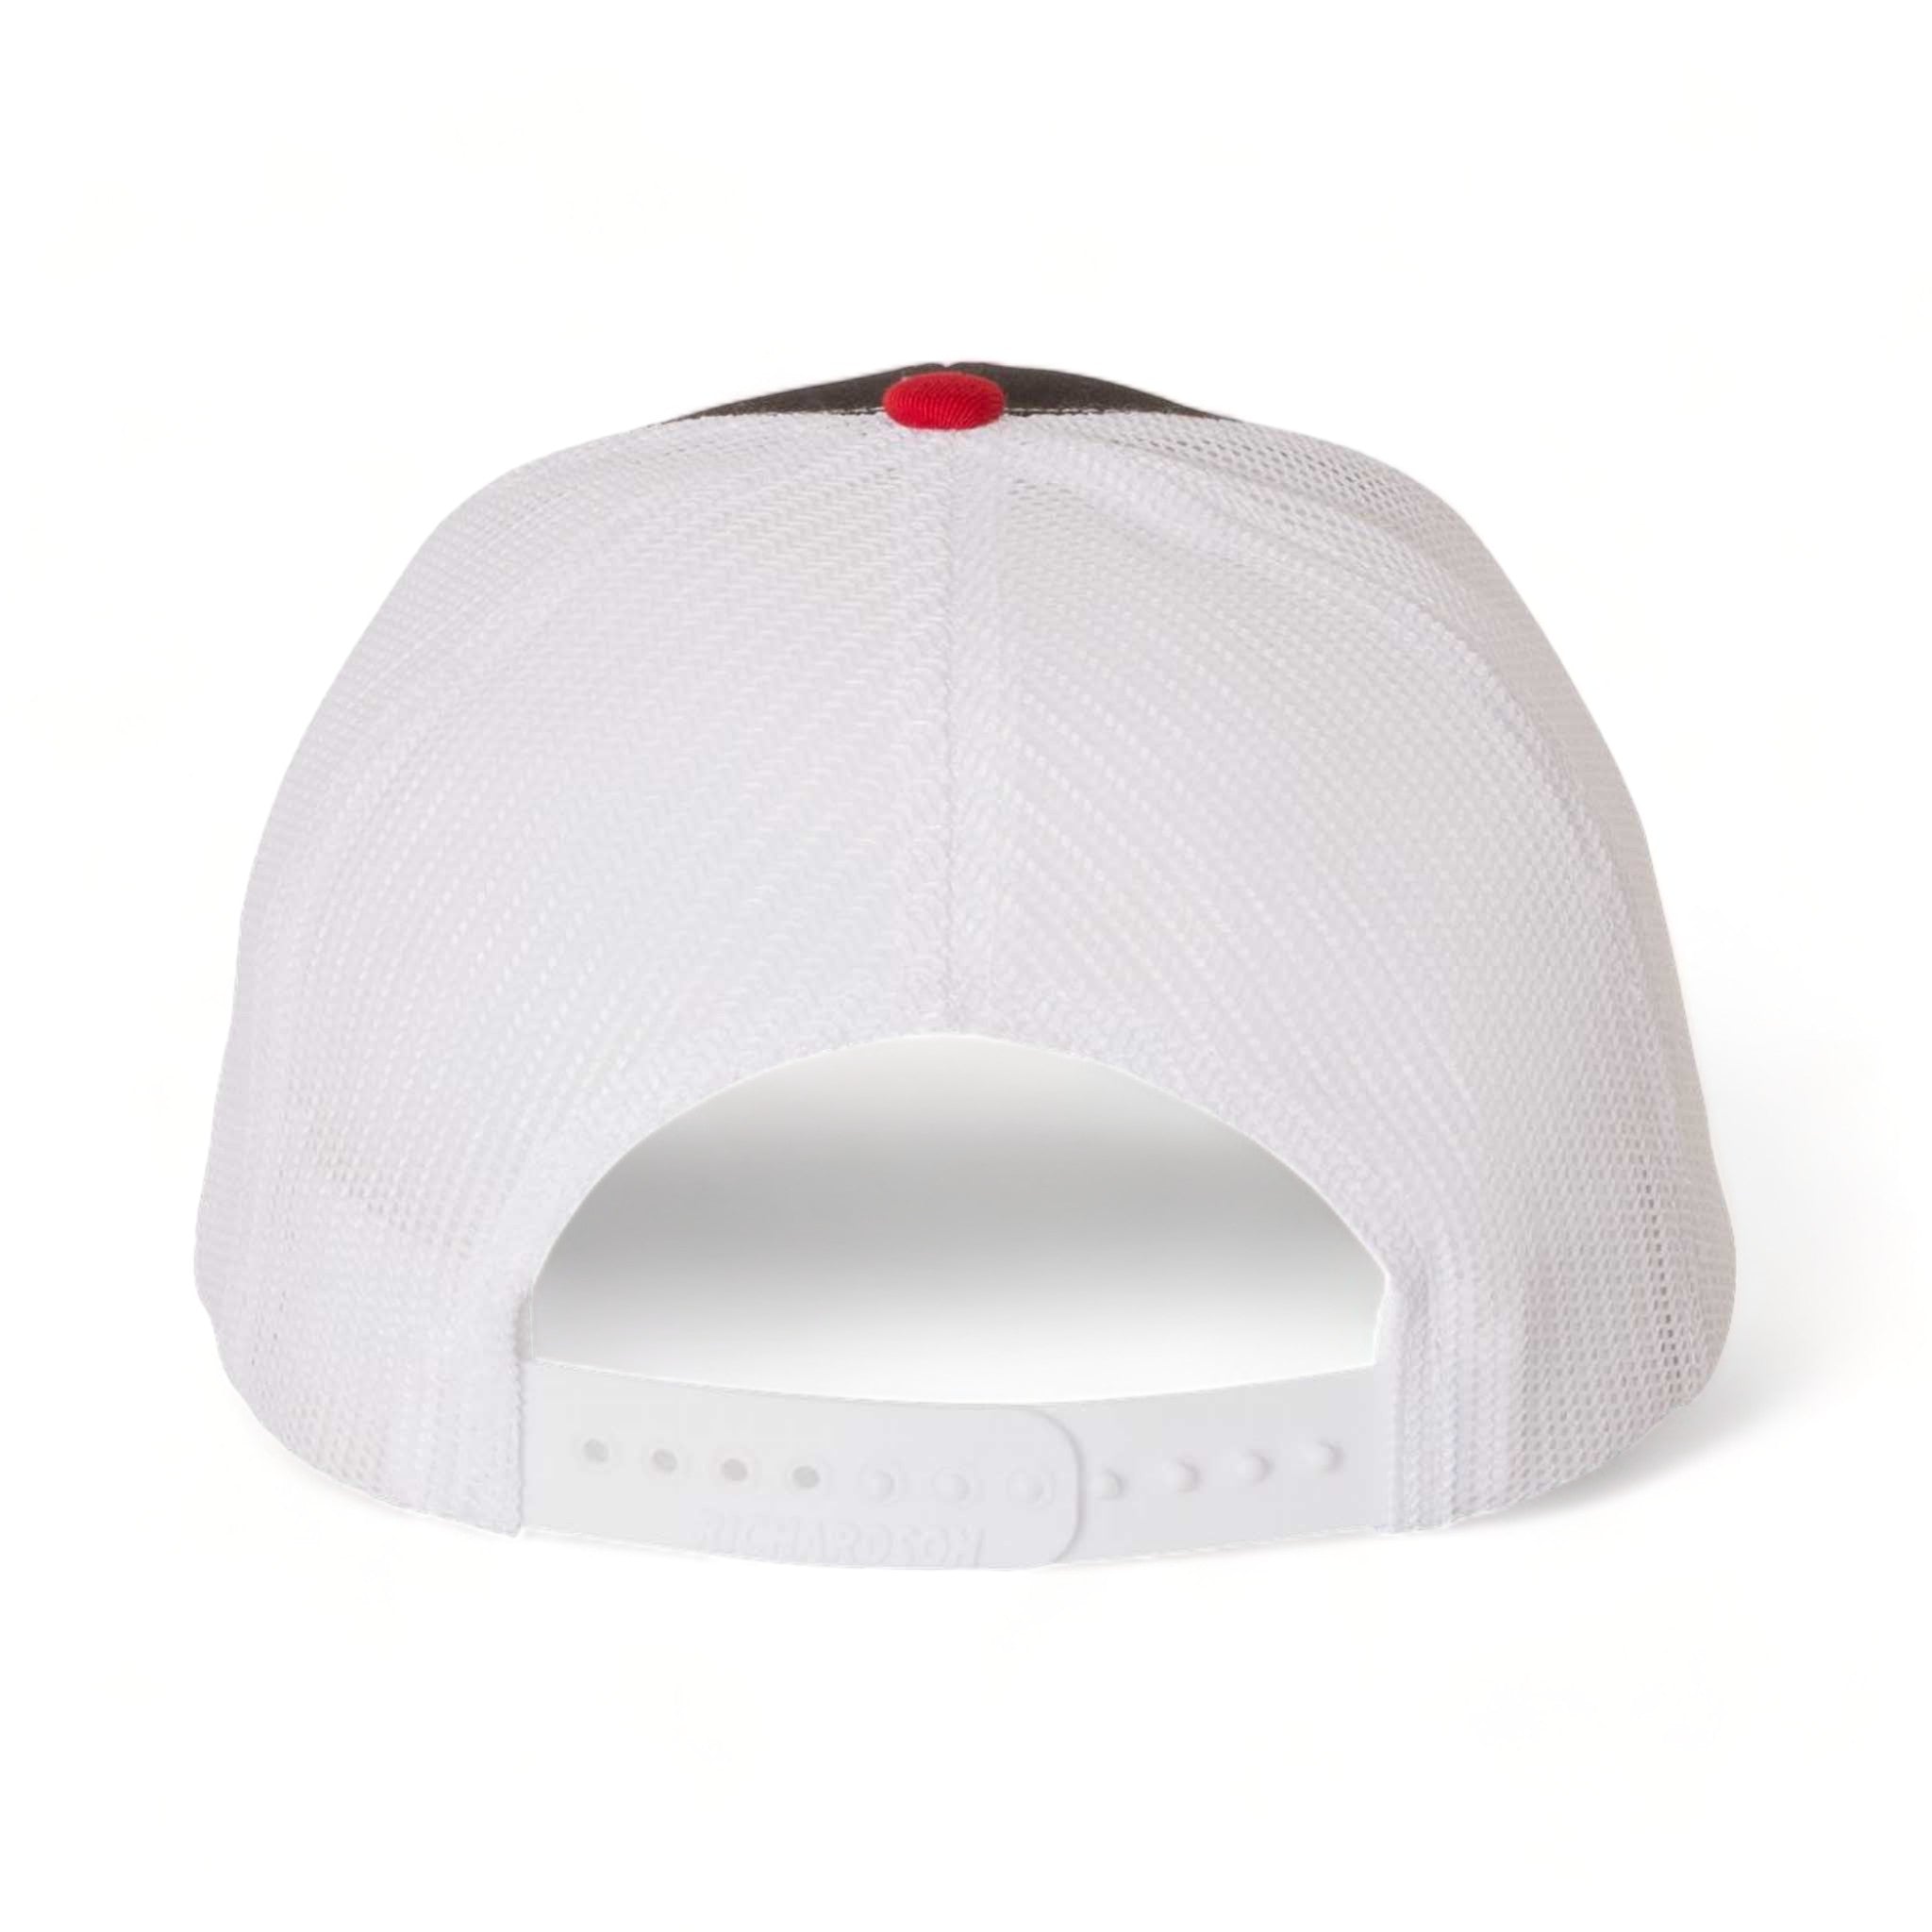 Back view of Richardson 112 custom hat in black, white and red